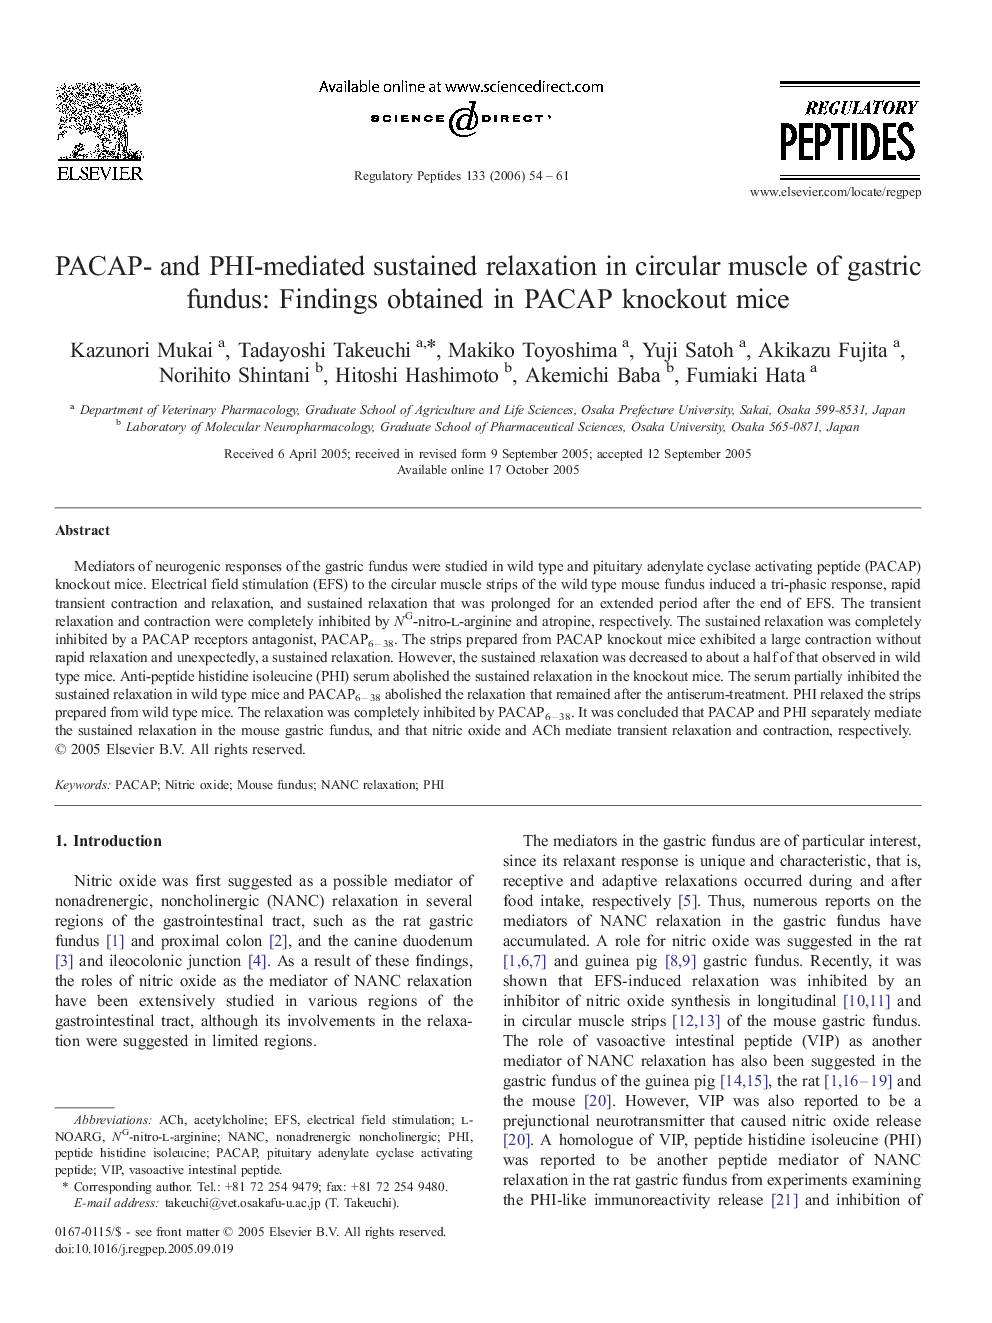 PACAP- and PHI-mediated sustained relaxation in circular muscle of gastric fundus: Findings obtained in PACAP knockout mice